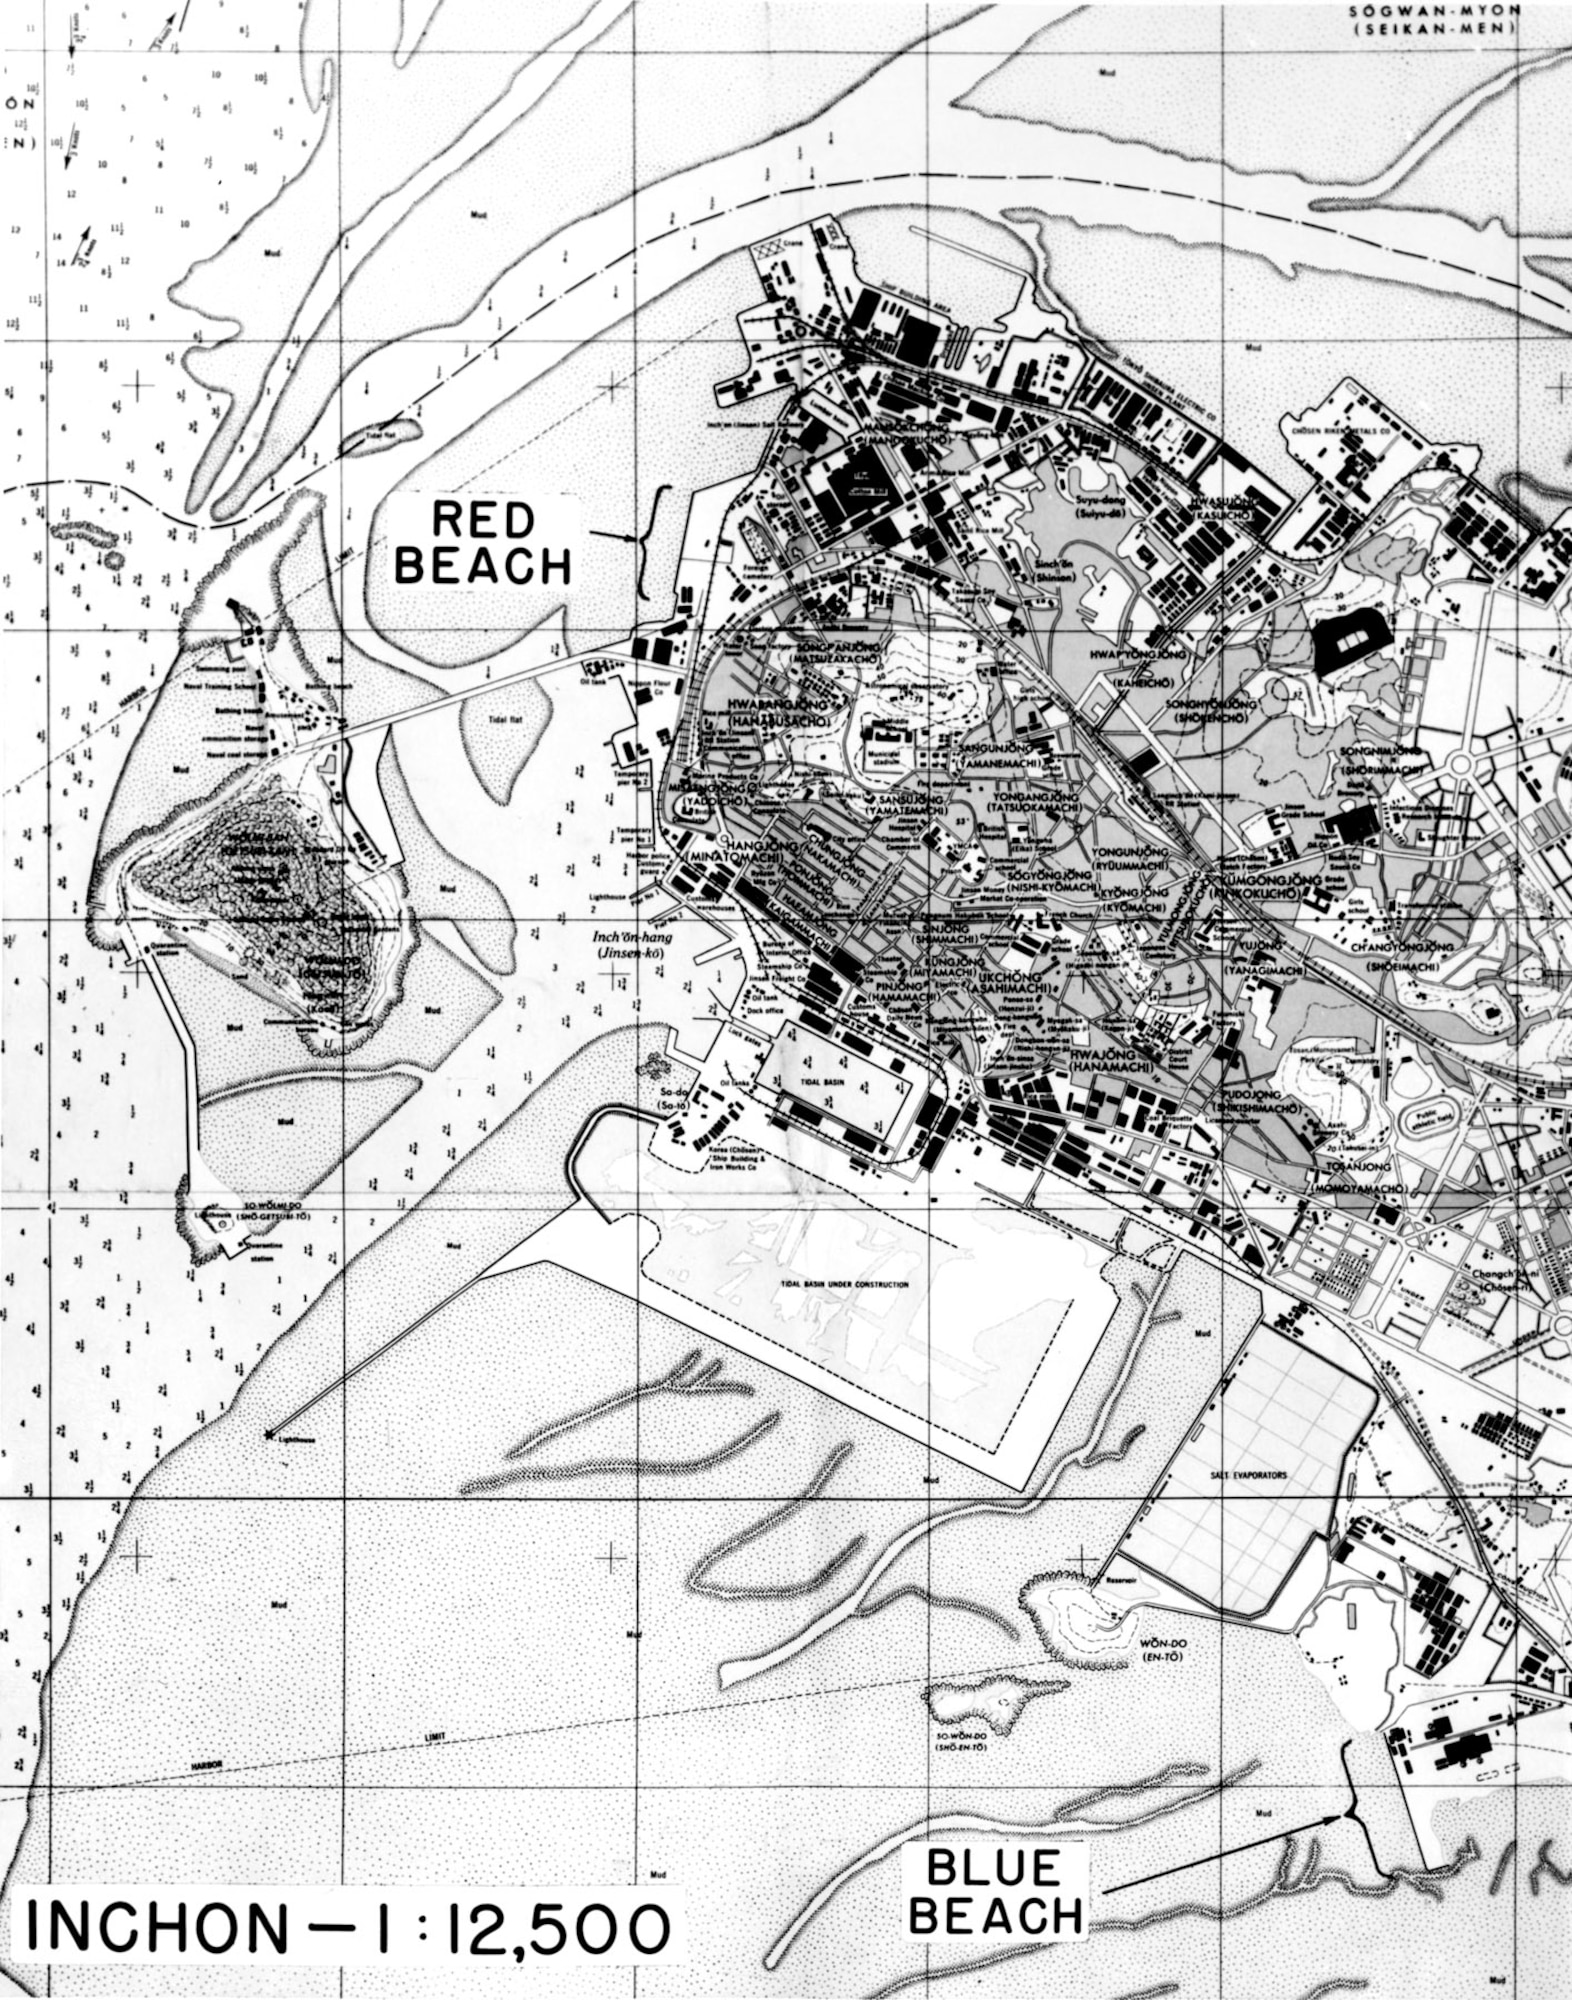 Map of Inchon showing the landing beaches. (U.S. Air Force photo)